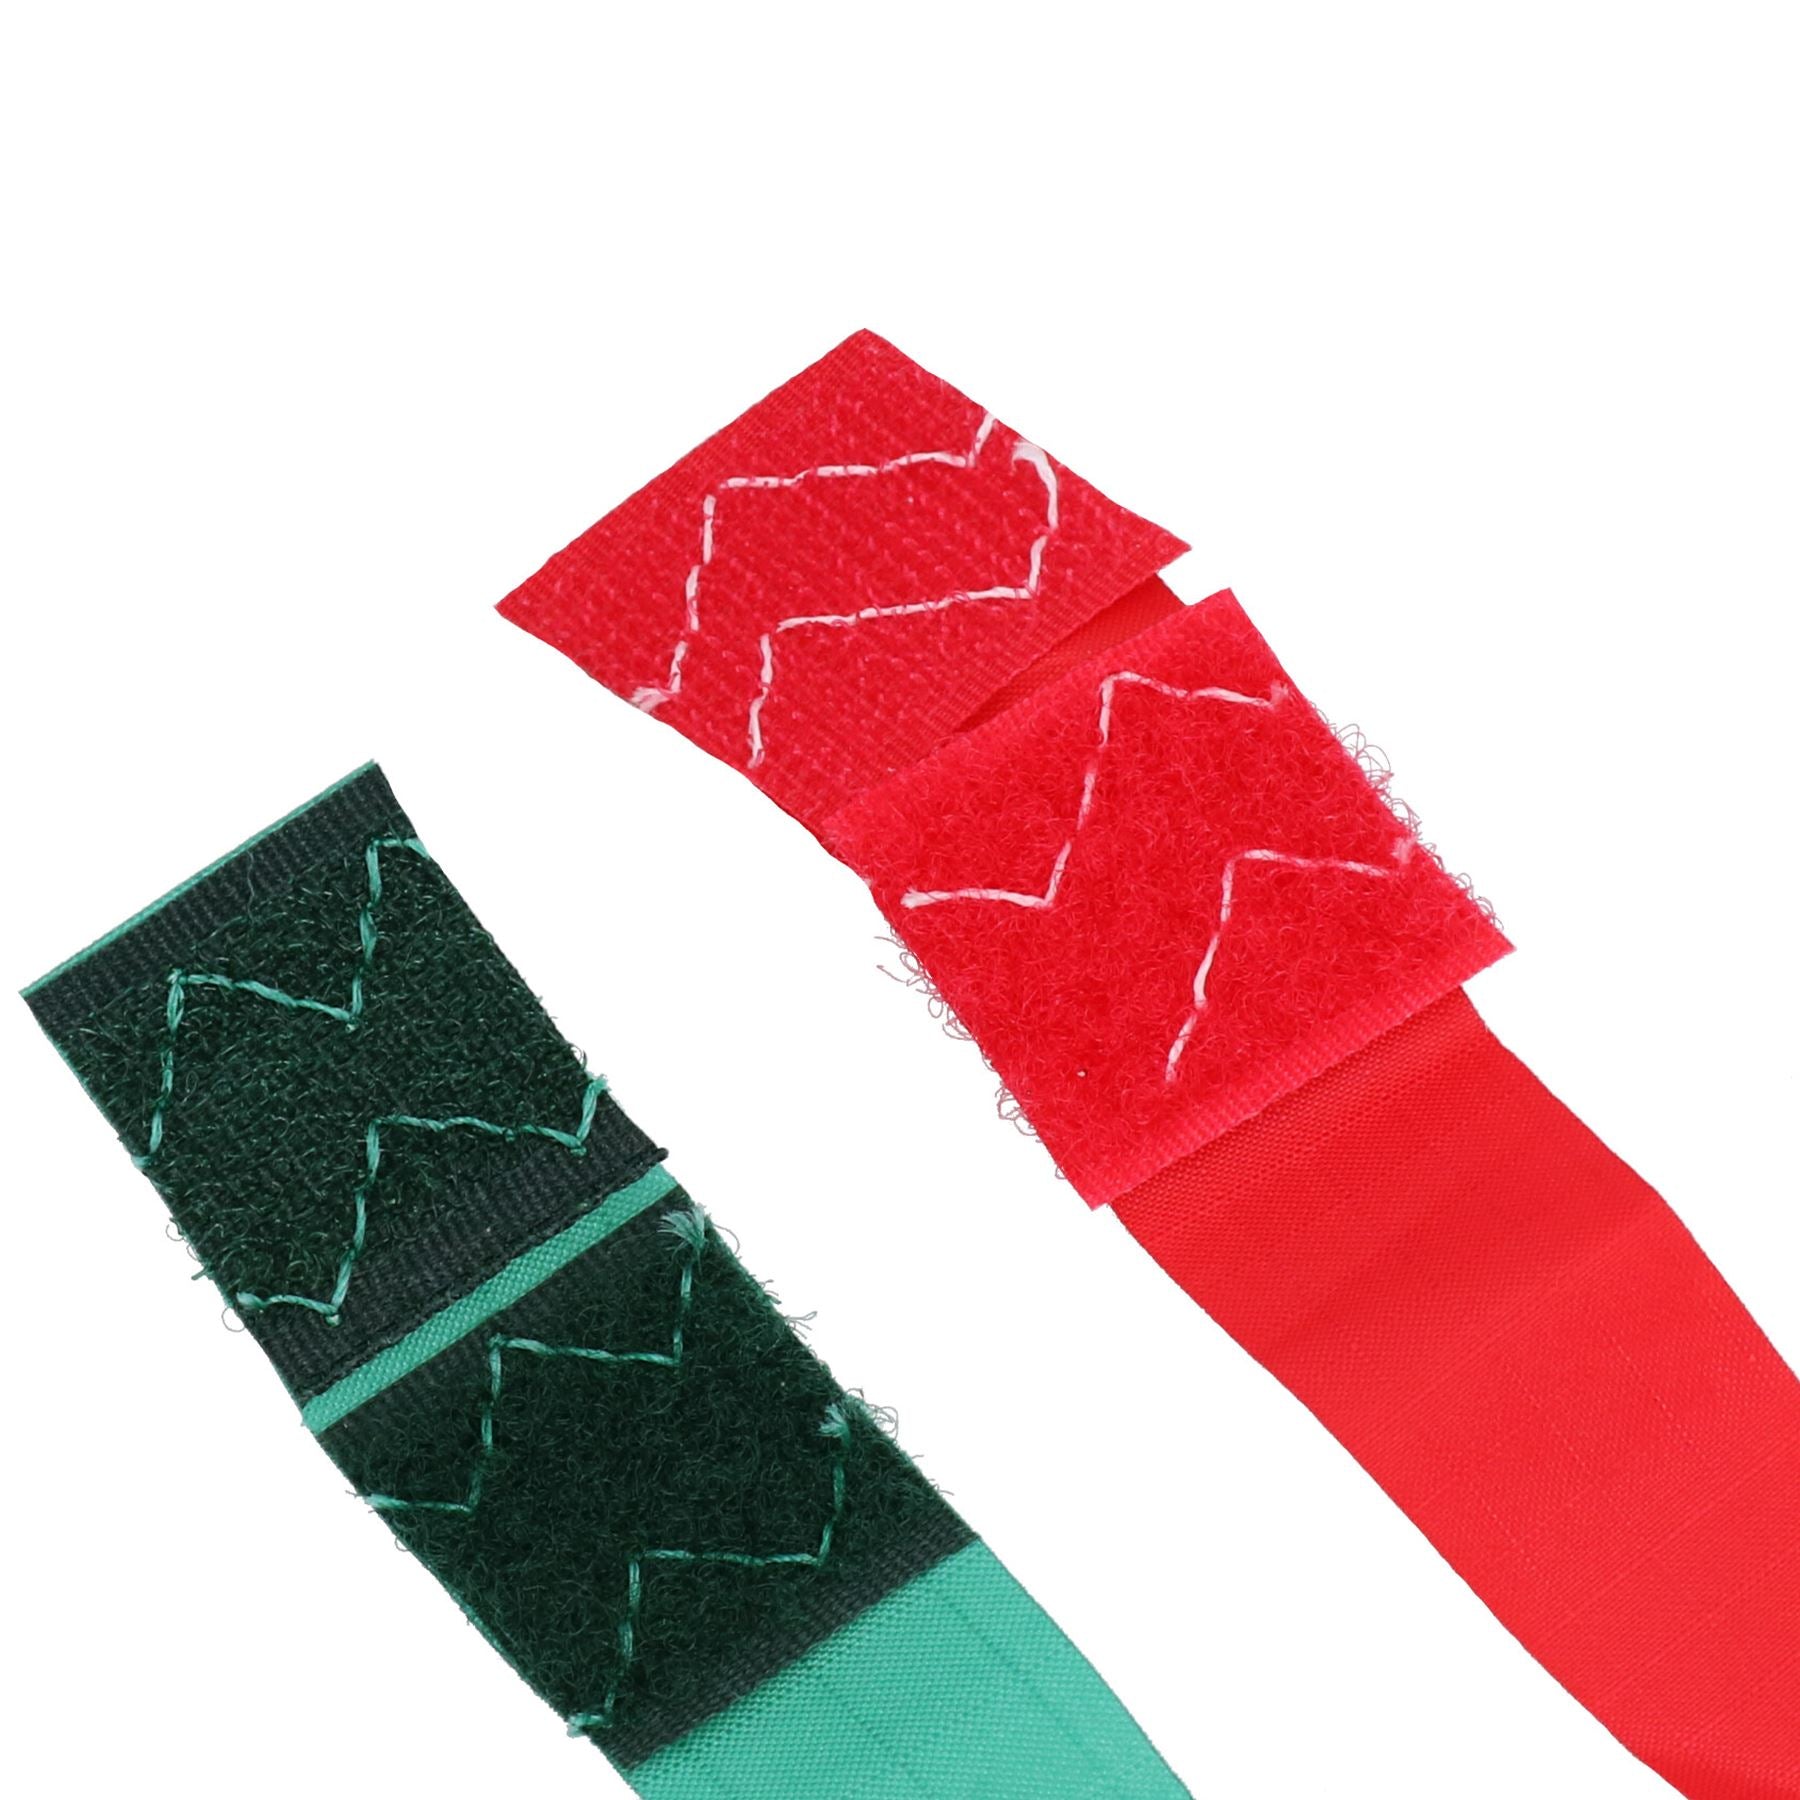 31cm Shroud Sail Tell Tales Red & Green Wind Indicator Dinghy Yacht Sailing